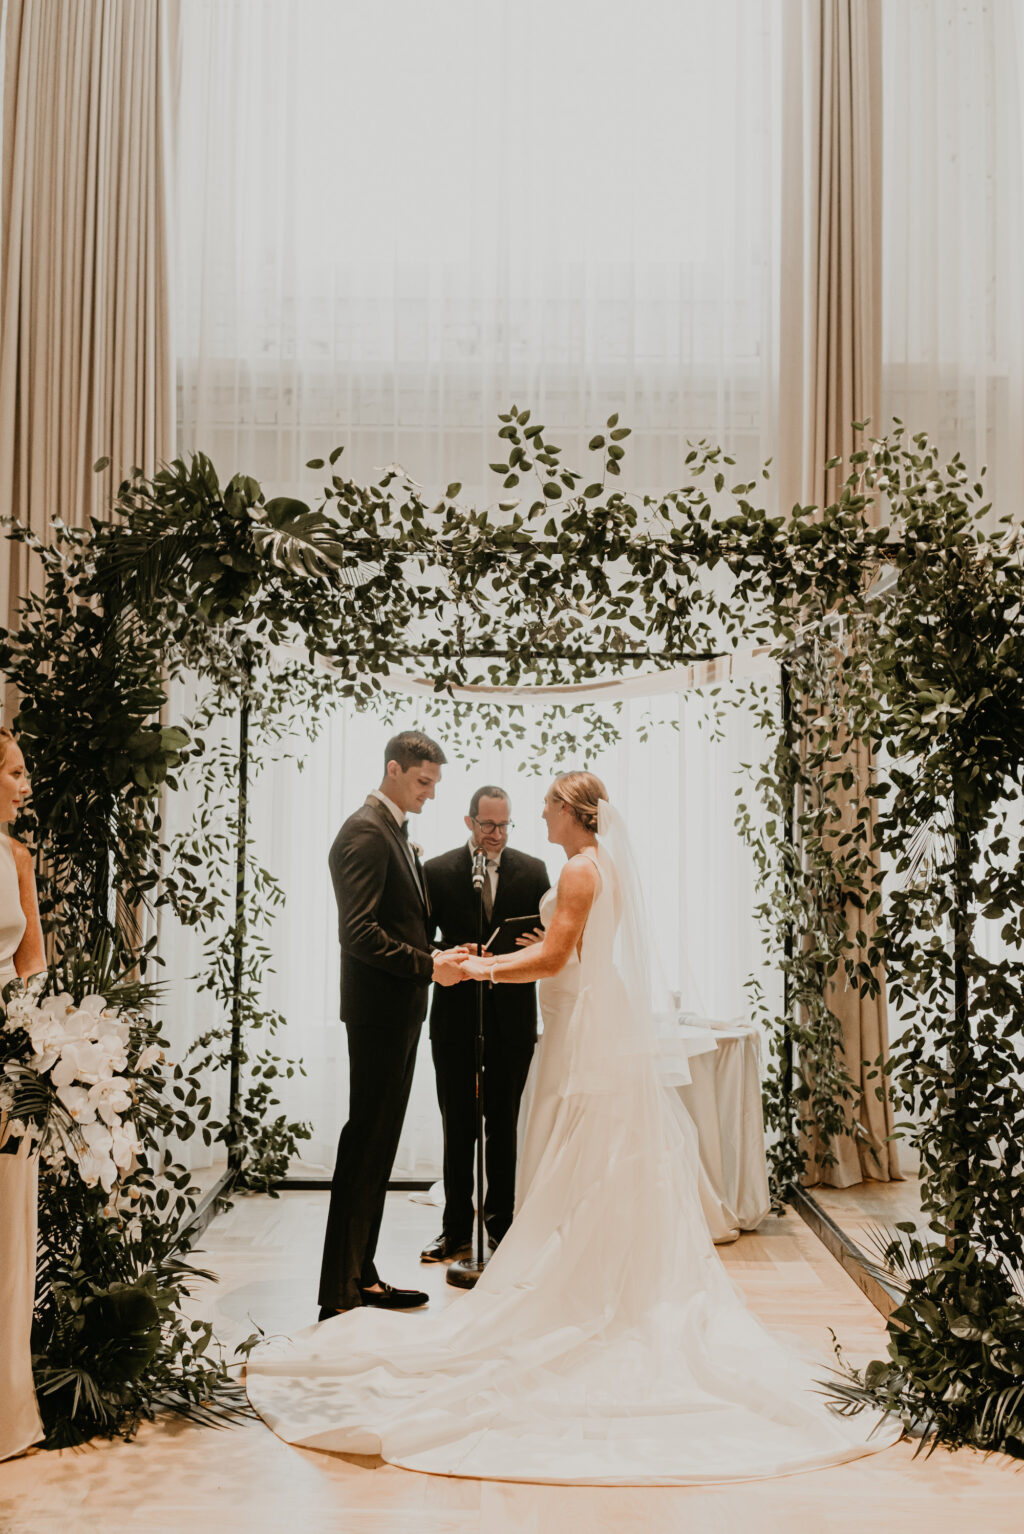 Modern Jewish Wedding Ceremony Chuppah with Greenery | Tampa Bay Florist Monarch Events and Design | Planner Coastal Coordinating | Historic Boutique Venue Hotel Haya